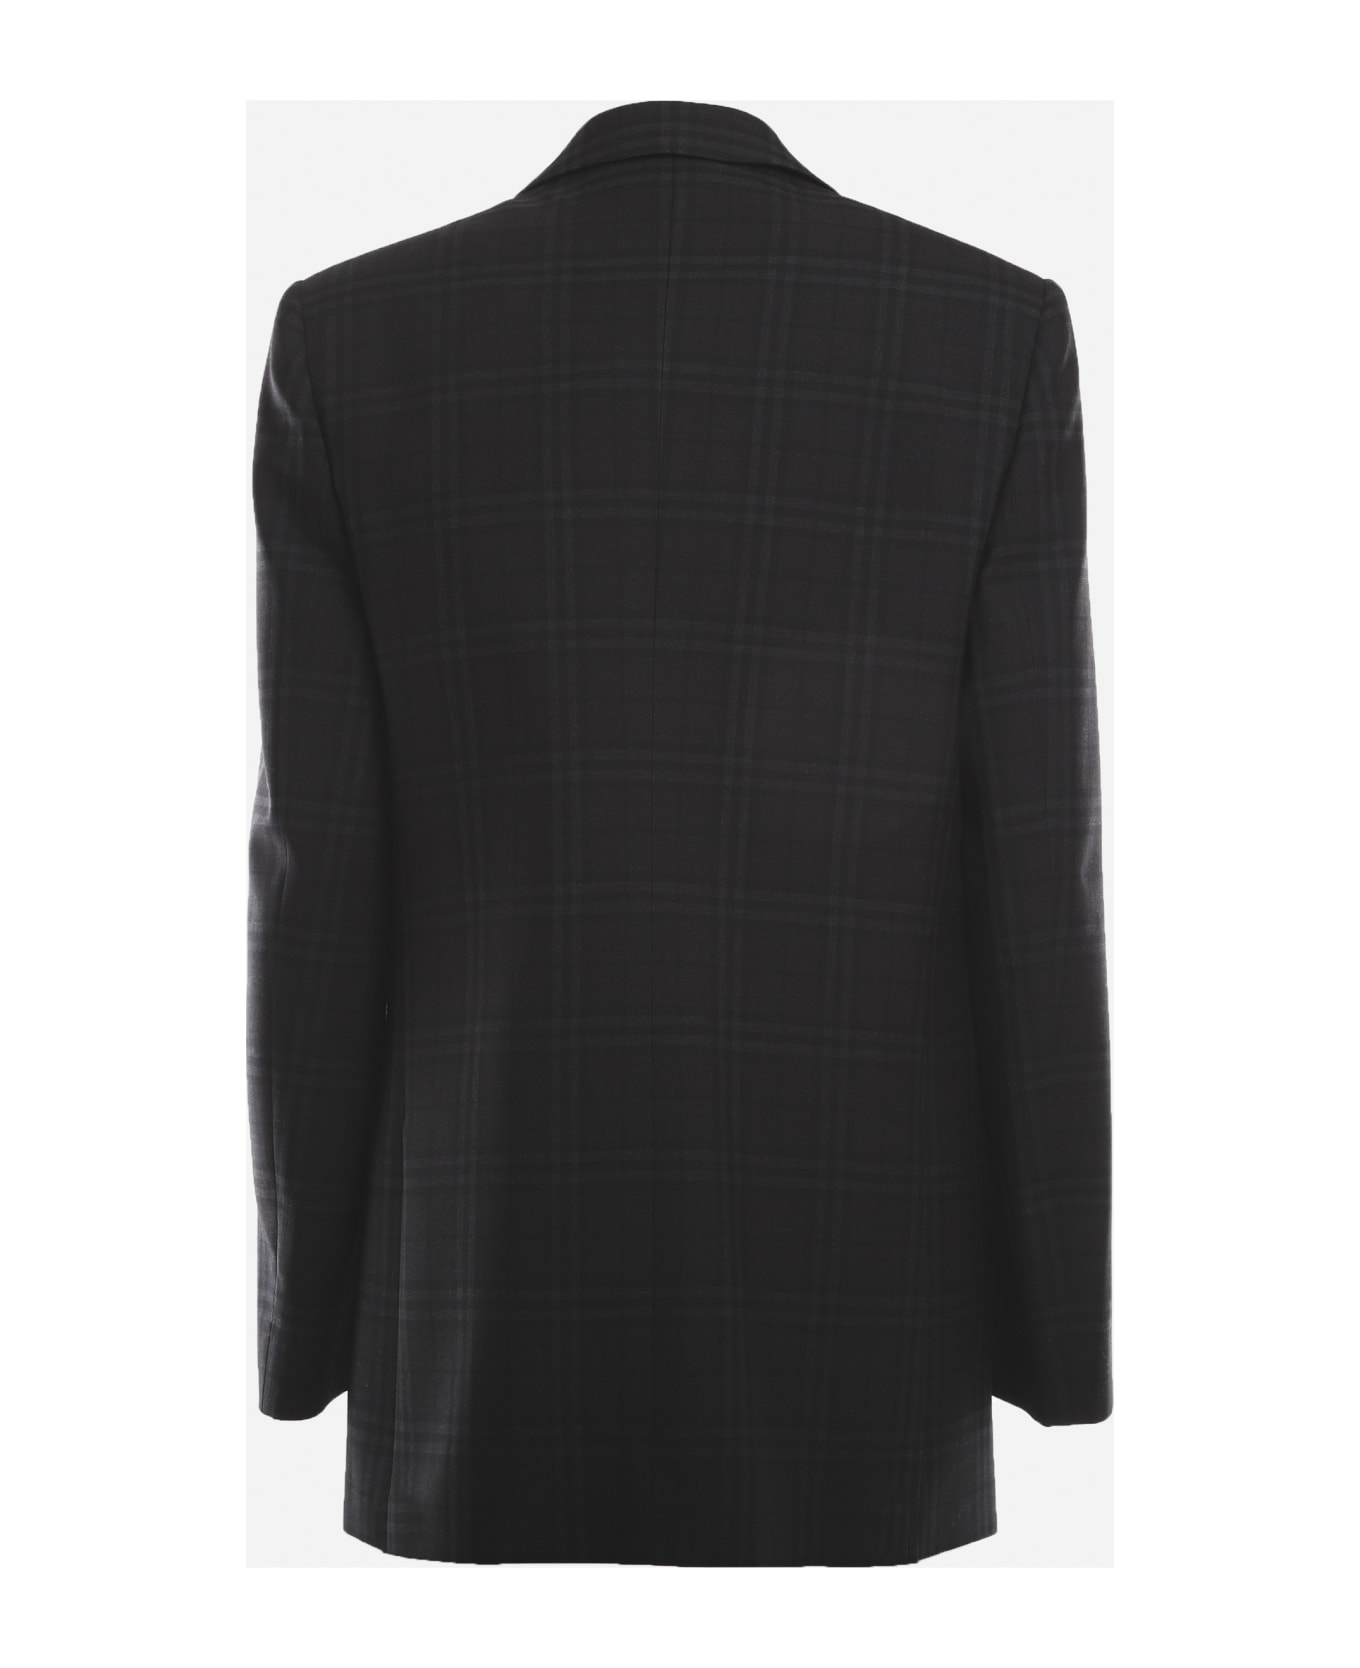 Burberry Wool Jacket With All-over Check Pattern - Dark charcoal ブレザー